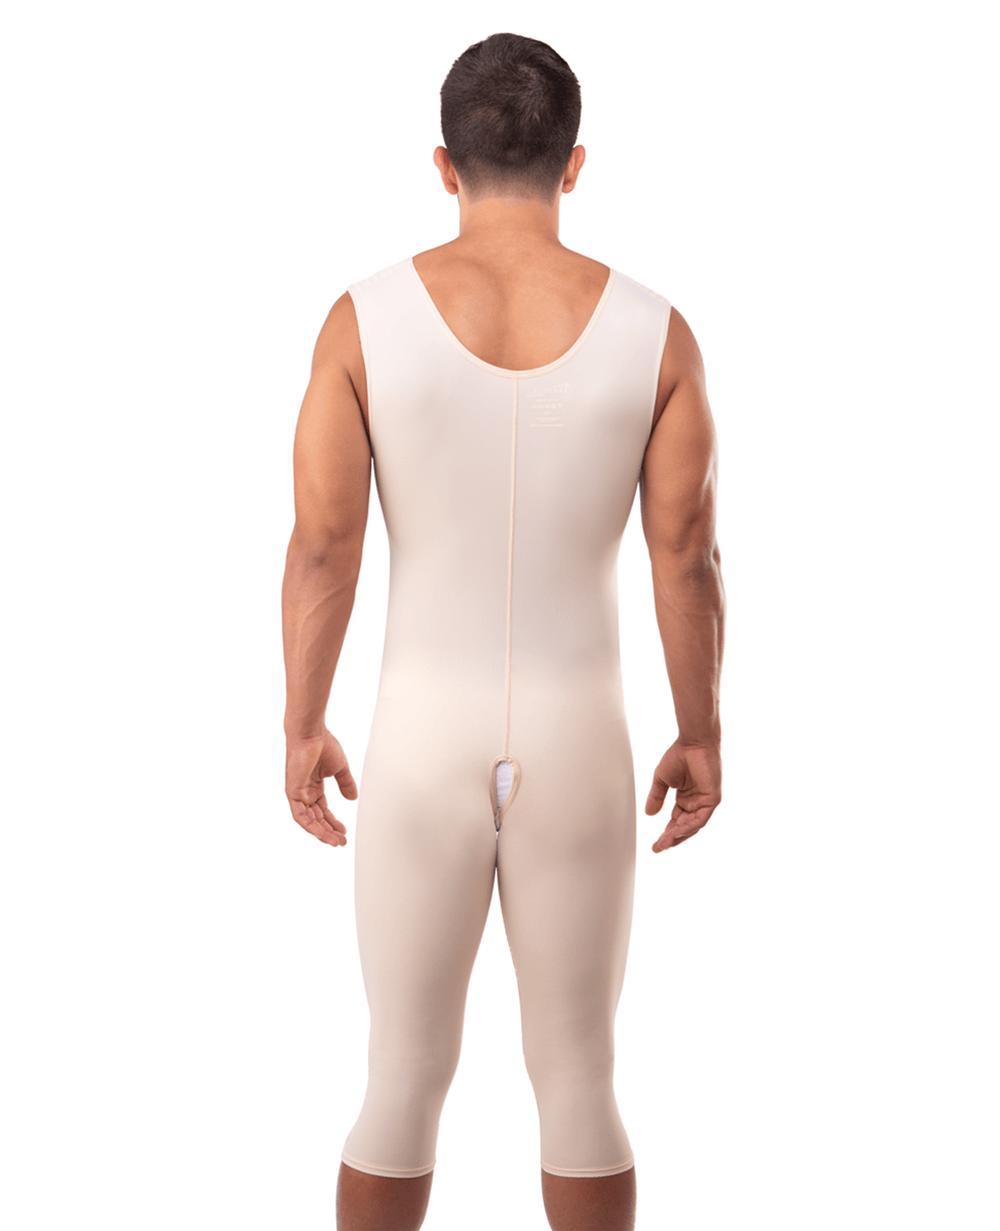 2nd Stage Male Full Body Below Knee Abdominal Cosmetic Surgery Compression Garment (MG08-BK)